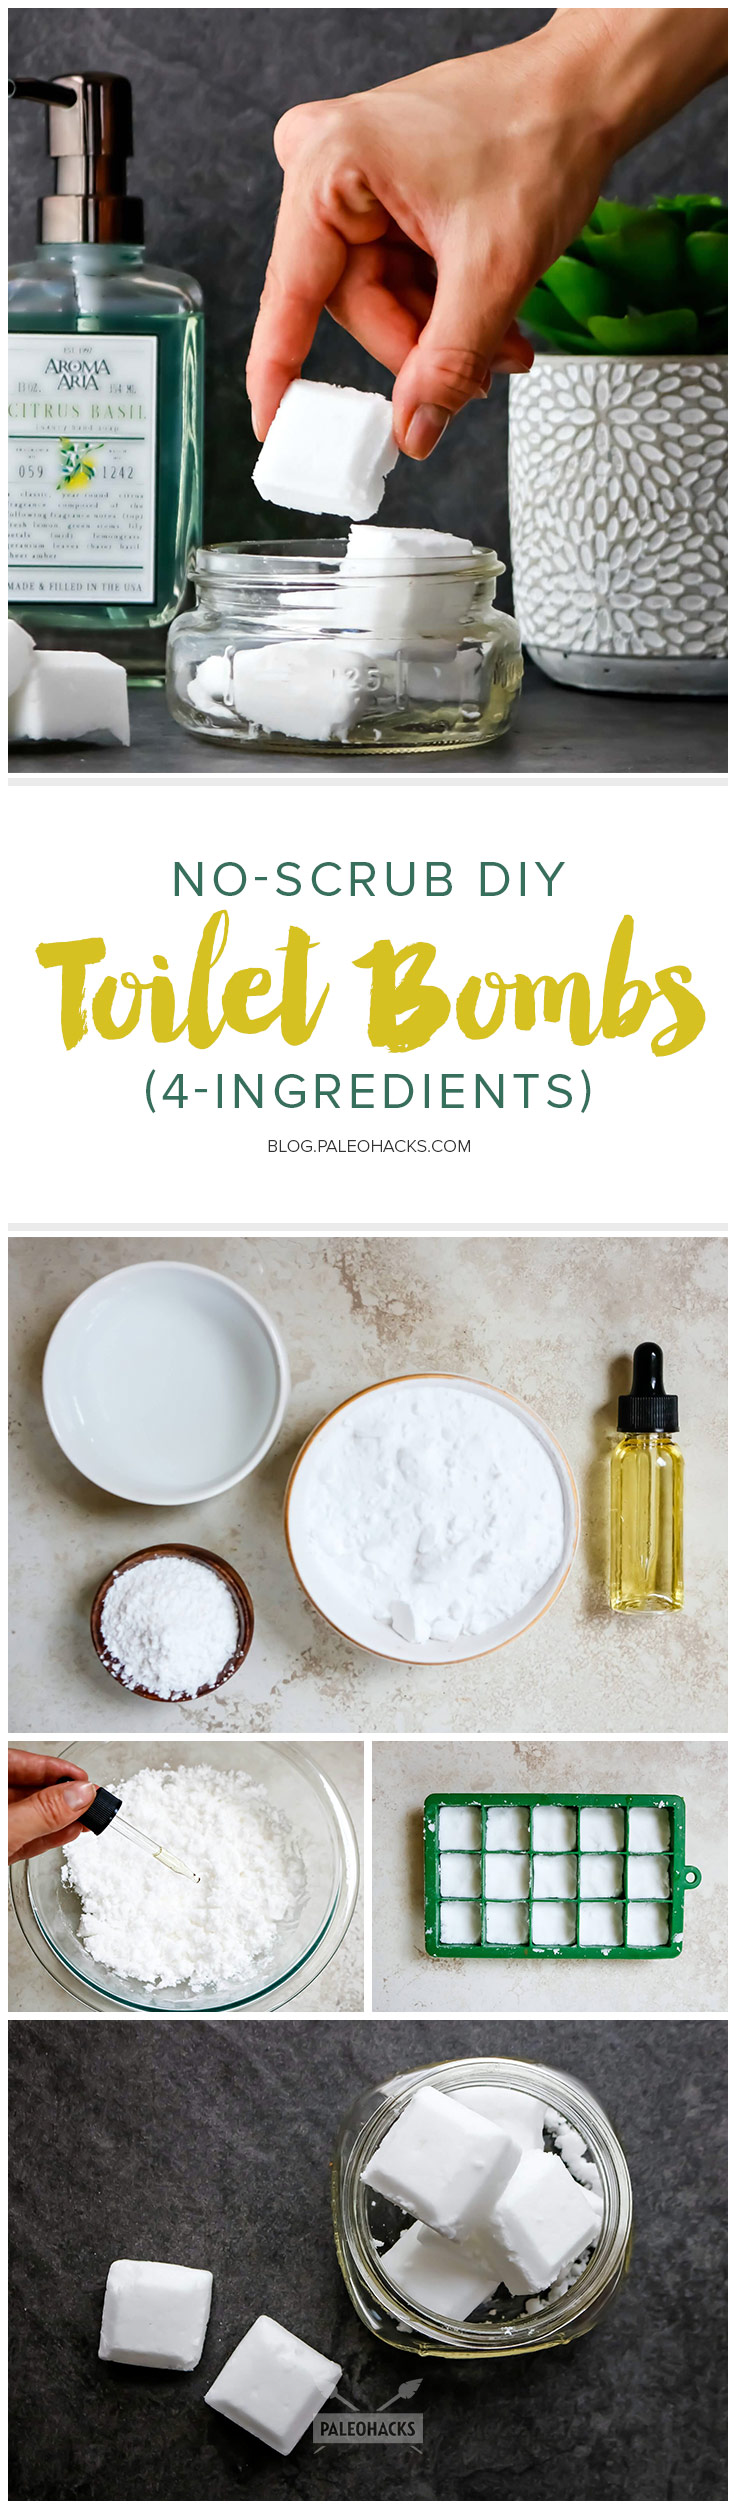 Freshen your bathroom with non-toxic Toilet Bowl Bombs made to clean your toilet - without scrubbing. Your most hated chose just got better.